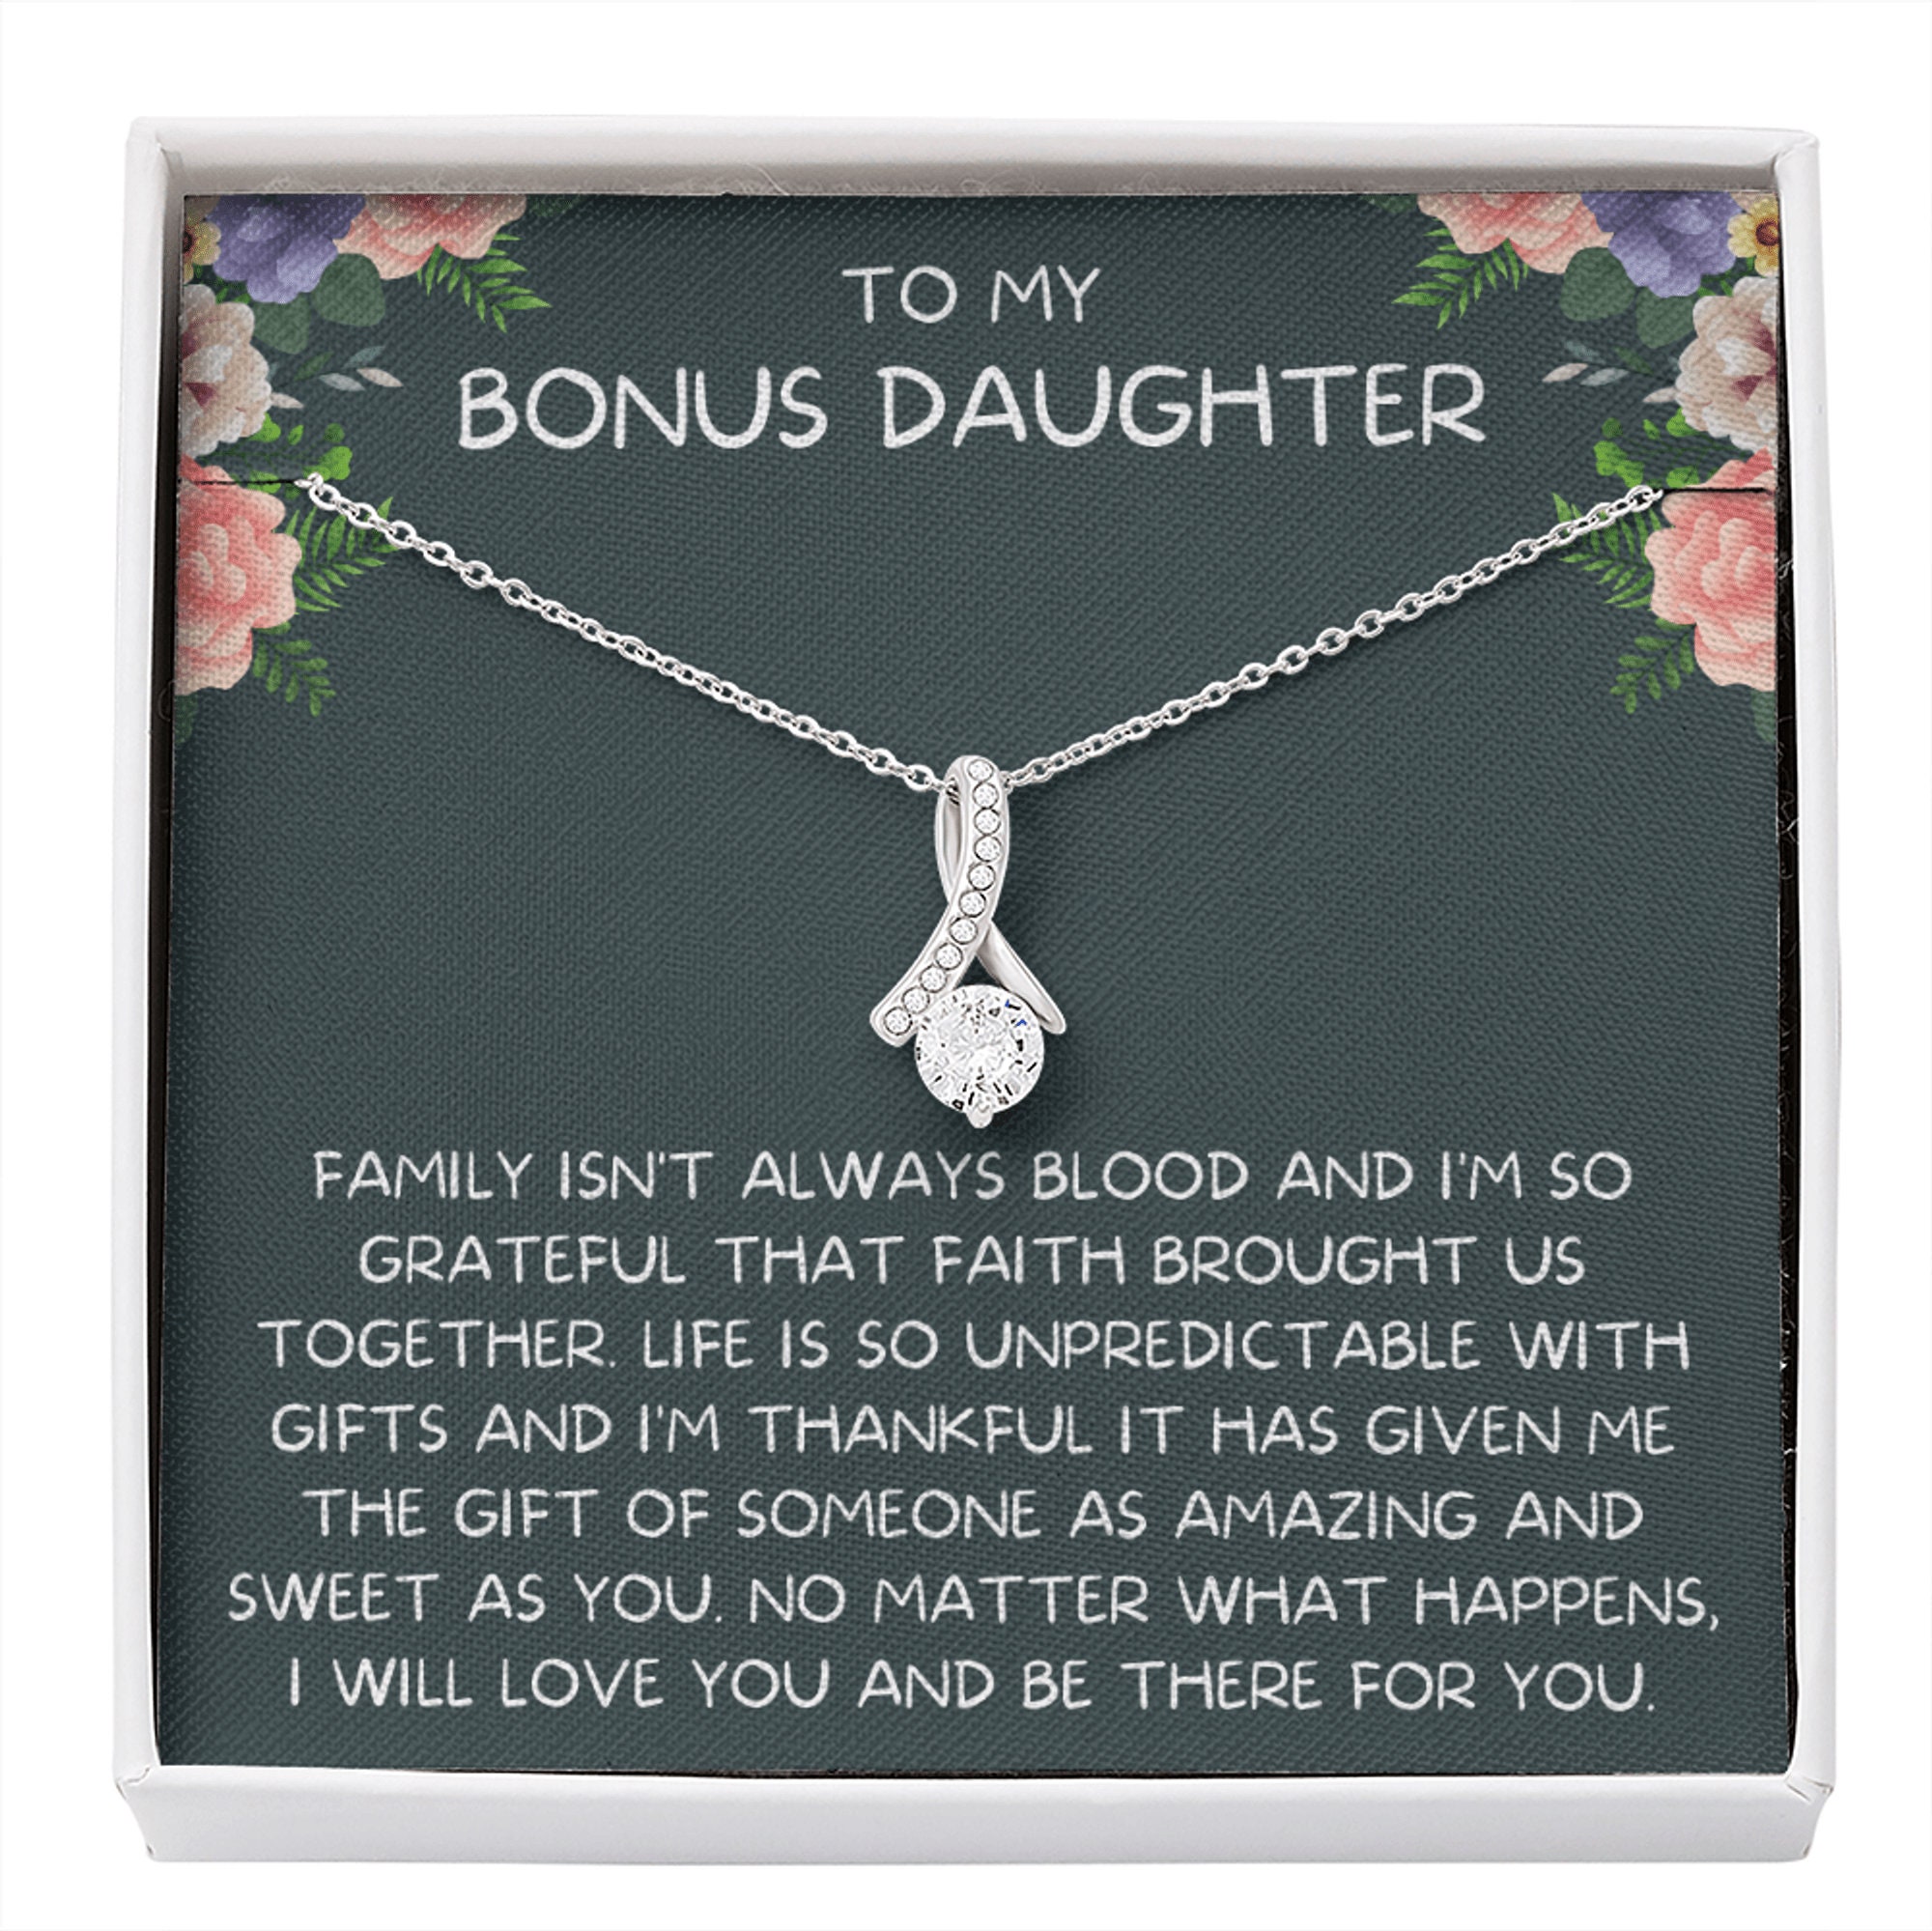 Bonus Daughter Jewelry Gifts Adoptive Daughter Gift Necklace Custom Initial Bonus Daughter Necklace with Card Step Daughter Gift